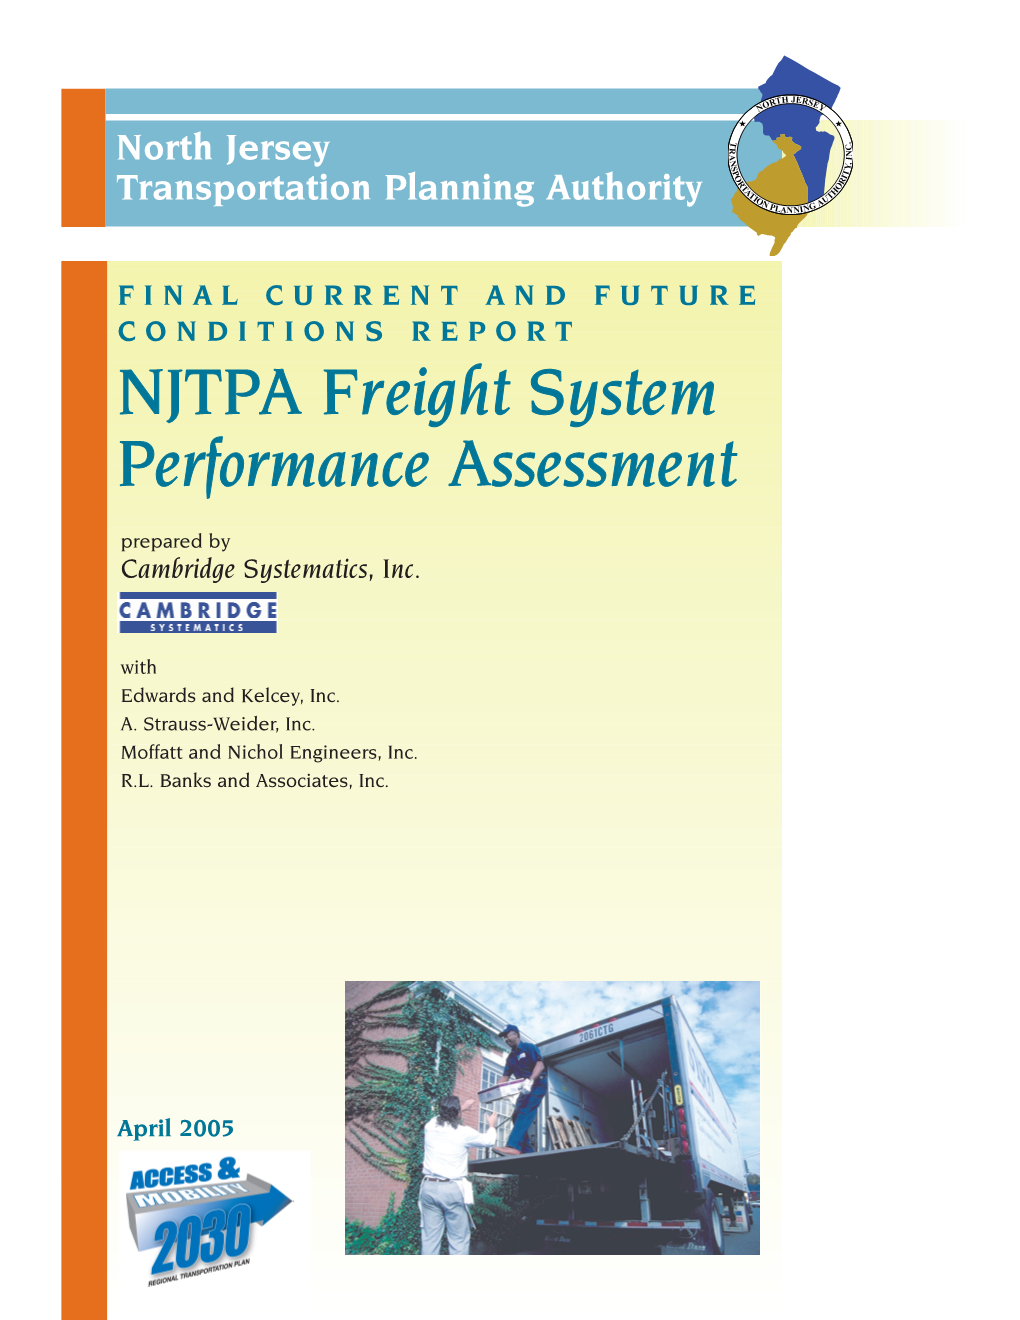 NJTPA Freight System Performance Assessment